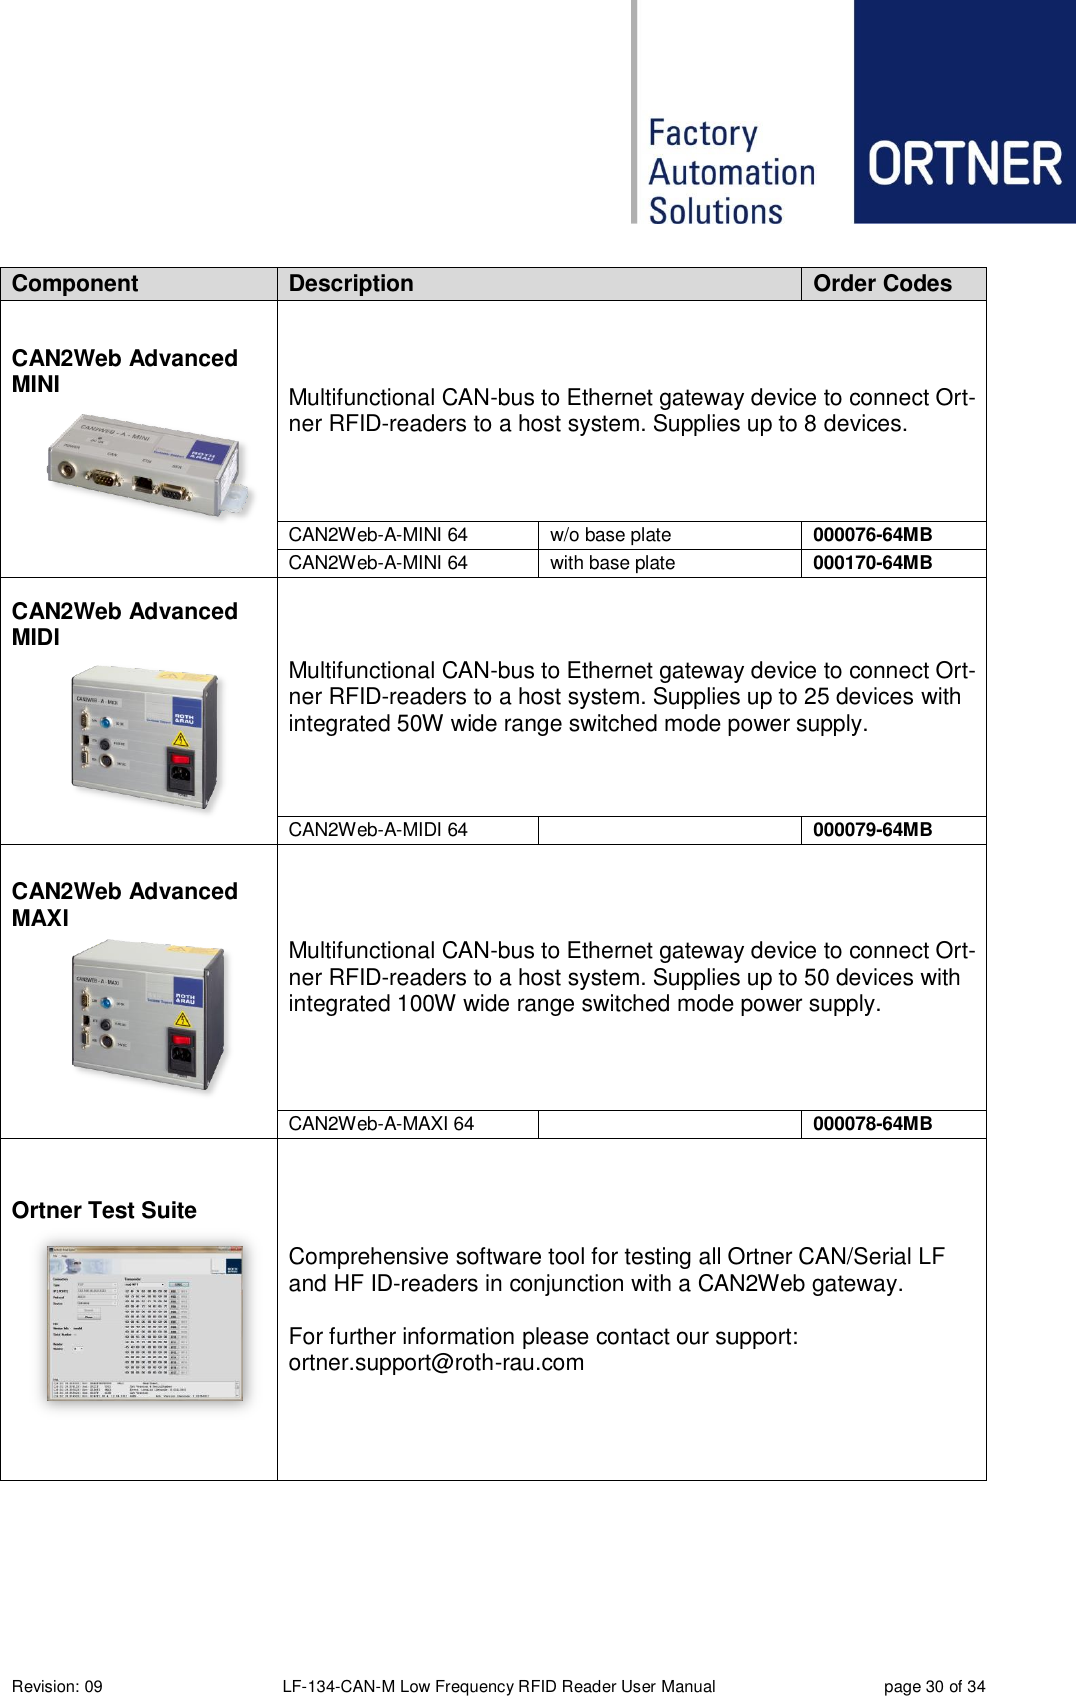  Revision: 09 LF-134-CAN-M Low Frequency RFID Reader User Manual  page 30 of 34 Component Description Order Codes CAN2Web Advanced MINI  Multifunctional CAN-bus to Ethernet gateway device to connect Ort-ner RFID-readers to a host system. Supplies up to 8 devices. CAN2Web-A-MINI 64 w/o base plate 000076-64MB CAN2Web-A-MINI 64 with base plate  000170-64MB CAN2Web Advanced MIDI  Multifunctional CAN-bus to Ethernet gateway device to connect Ort-ner RFID-readers to a host system. Supplies up to 25 devices with integrated 50W wide range switched mode power supply. CAN2Web-A-MIDI 64  000079-64MB CAN2Web Advanced MAXI  Multifunctional CAN-bus to Ethernet gateway device to connect Ort-ner RFID-readers to a host system. Supplies up to 50 devices with integrated 100W wide range switched mode power supply. CAN2Web-A-MAXI 64  000078-64MB Ortner Test Suite  Comprehensive software tool for testing all Ortner CAN/Serial LF and HF ID-readers in conjunction with a CAN2Web gateway.  For further information please contact our support: ortner.support@roth-rau.com 